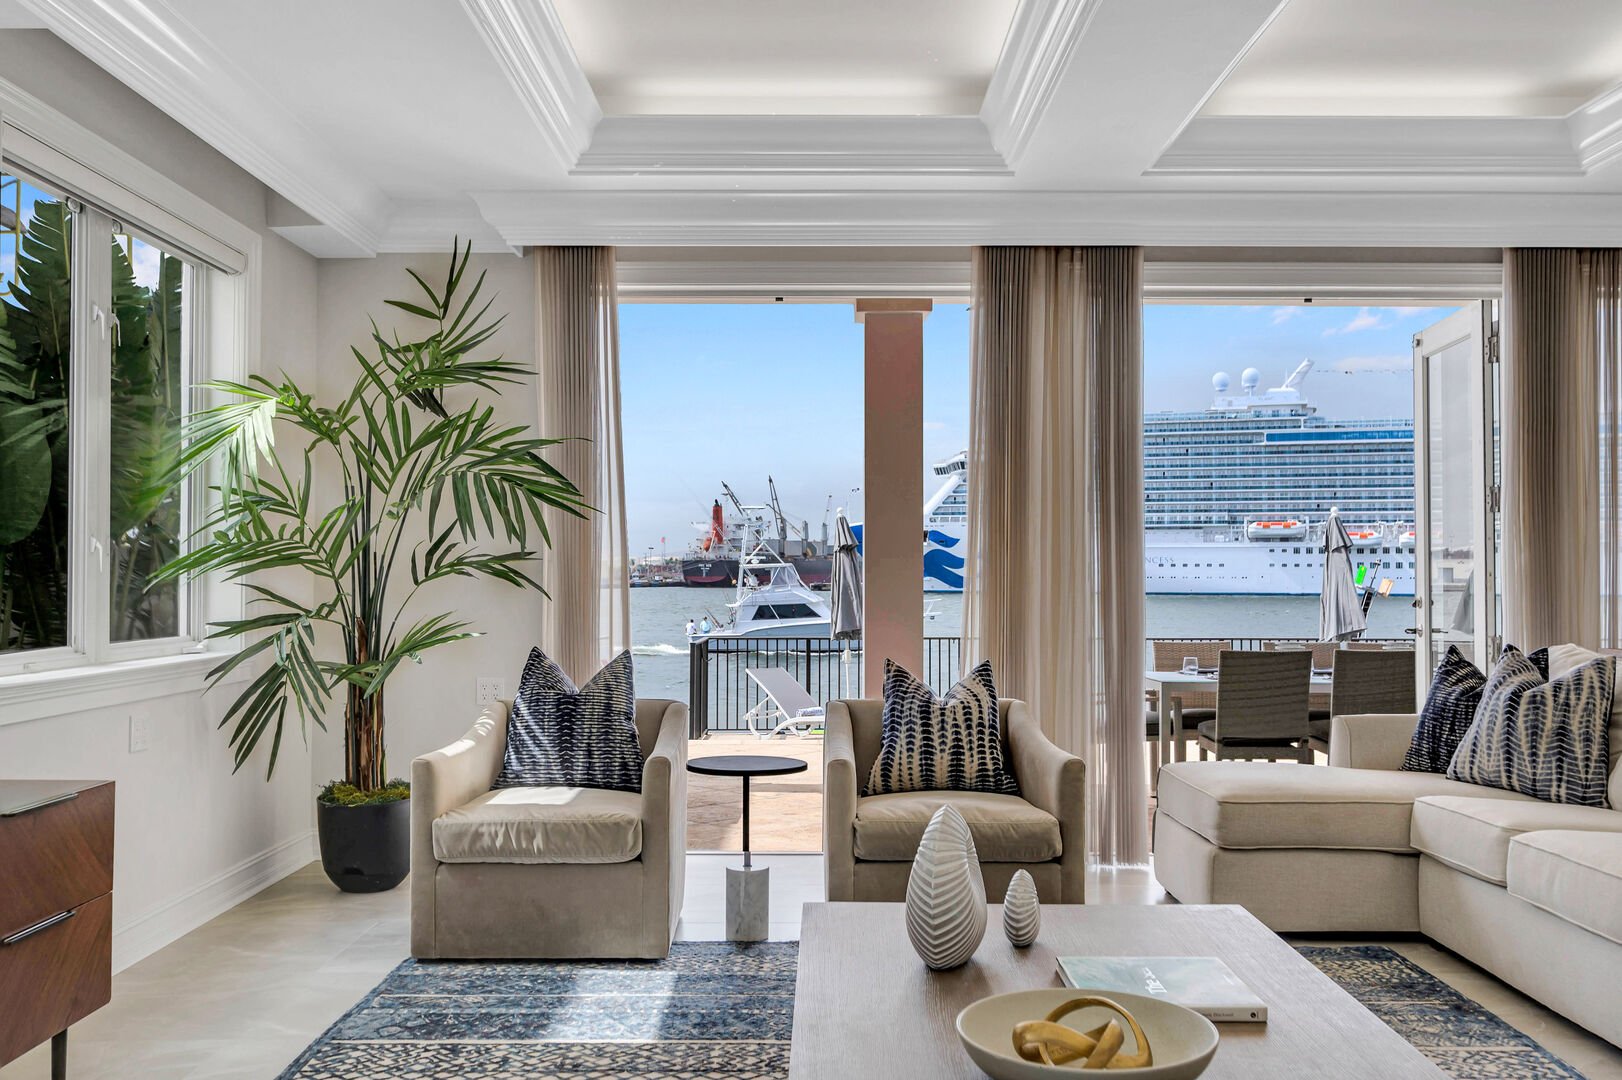 See the cruise ships from the comfort of the living room, complete with plenty of seating for all of your friends and family and an 85in Smart TV.